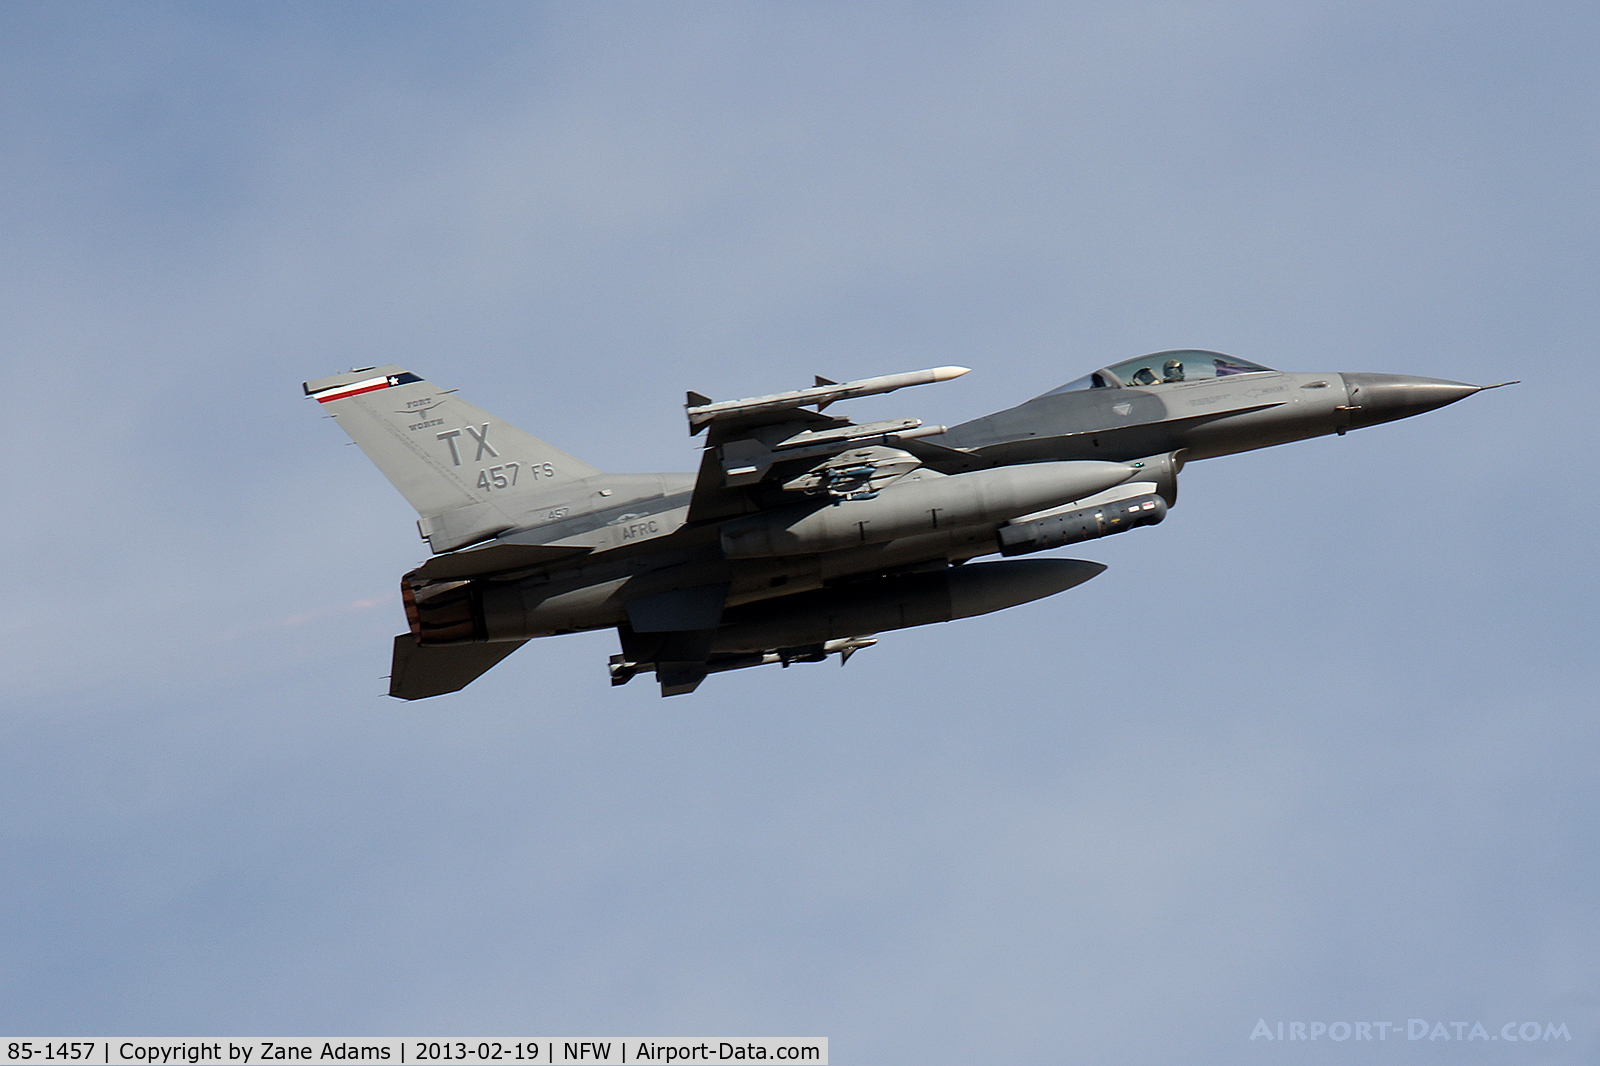 85-1457, 1985 General Dynamics F-16C Fighting Falcon C/N 5C-237, 301st Fighter Wing F-16 departing at NAS Fort Worth